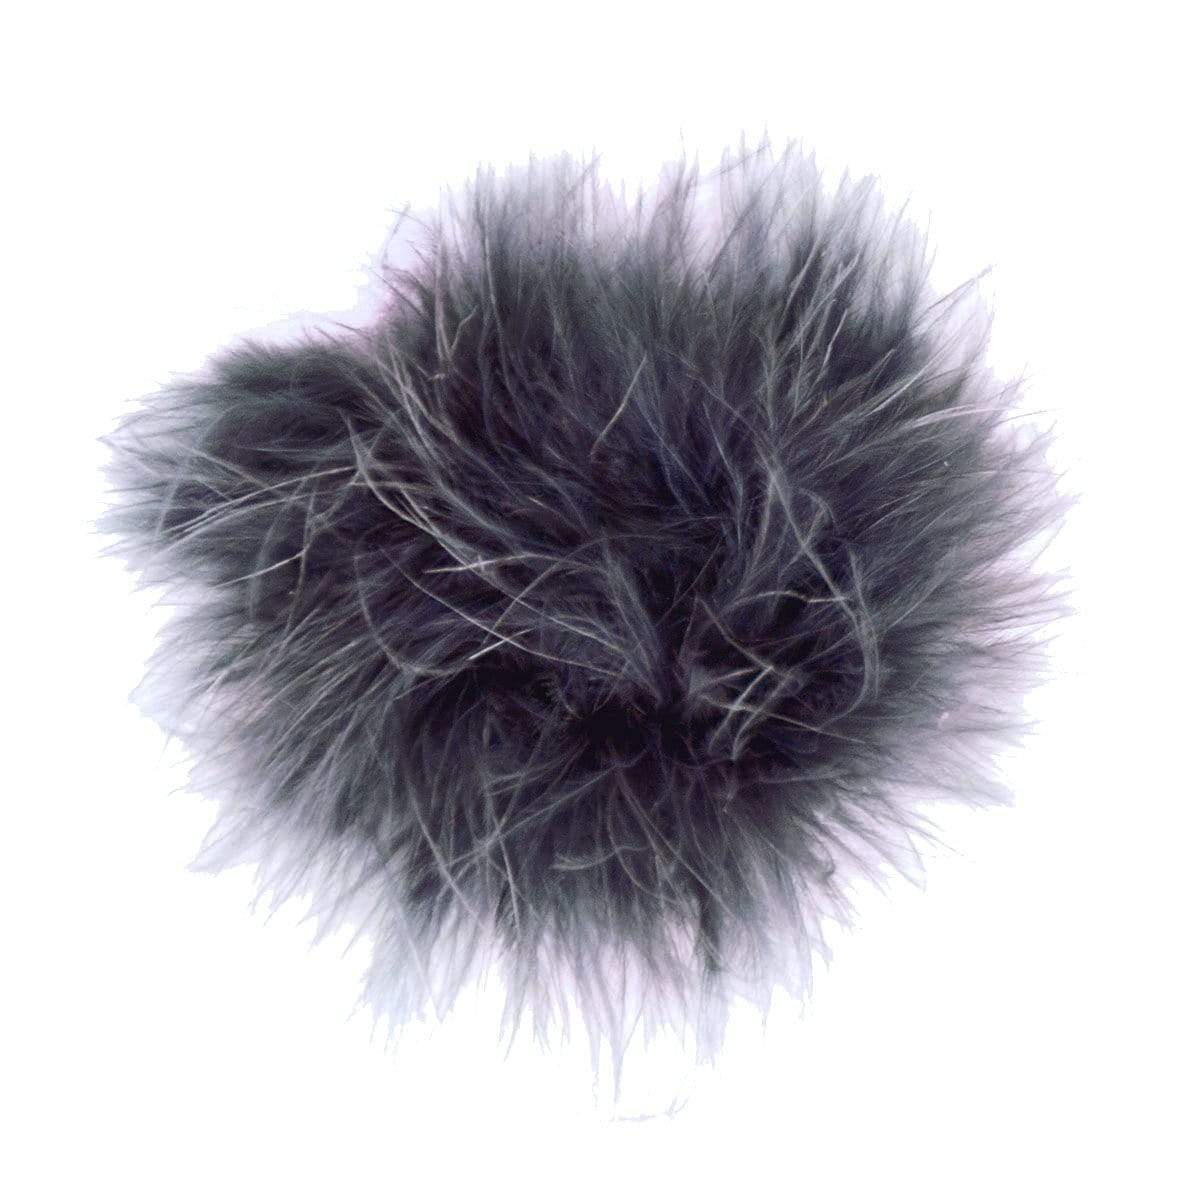 Marabou Feather Brooch in Gray Handmade by Pandemonium Seattle